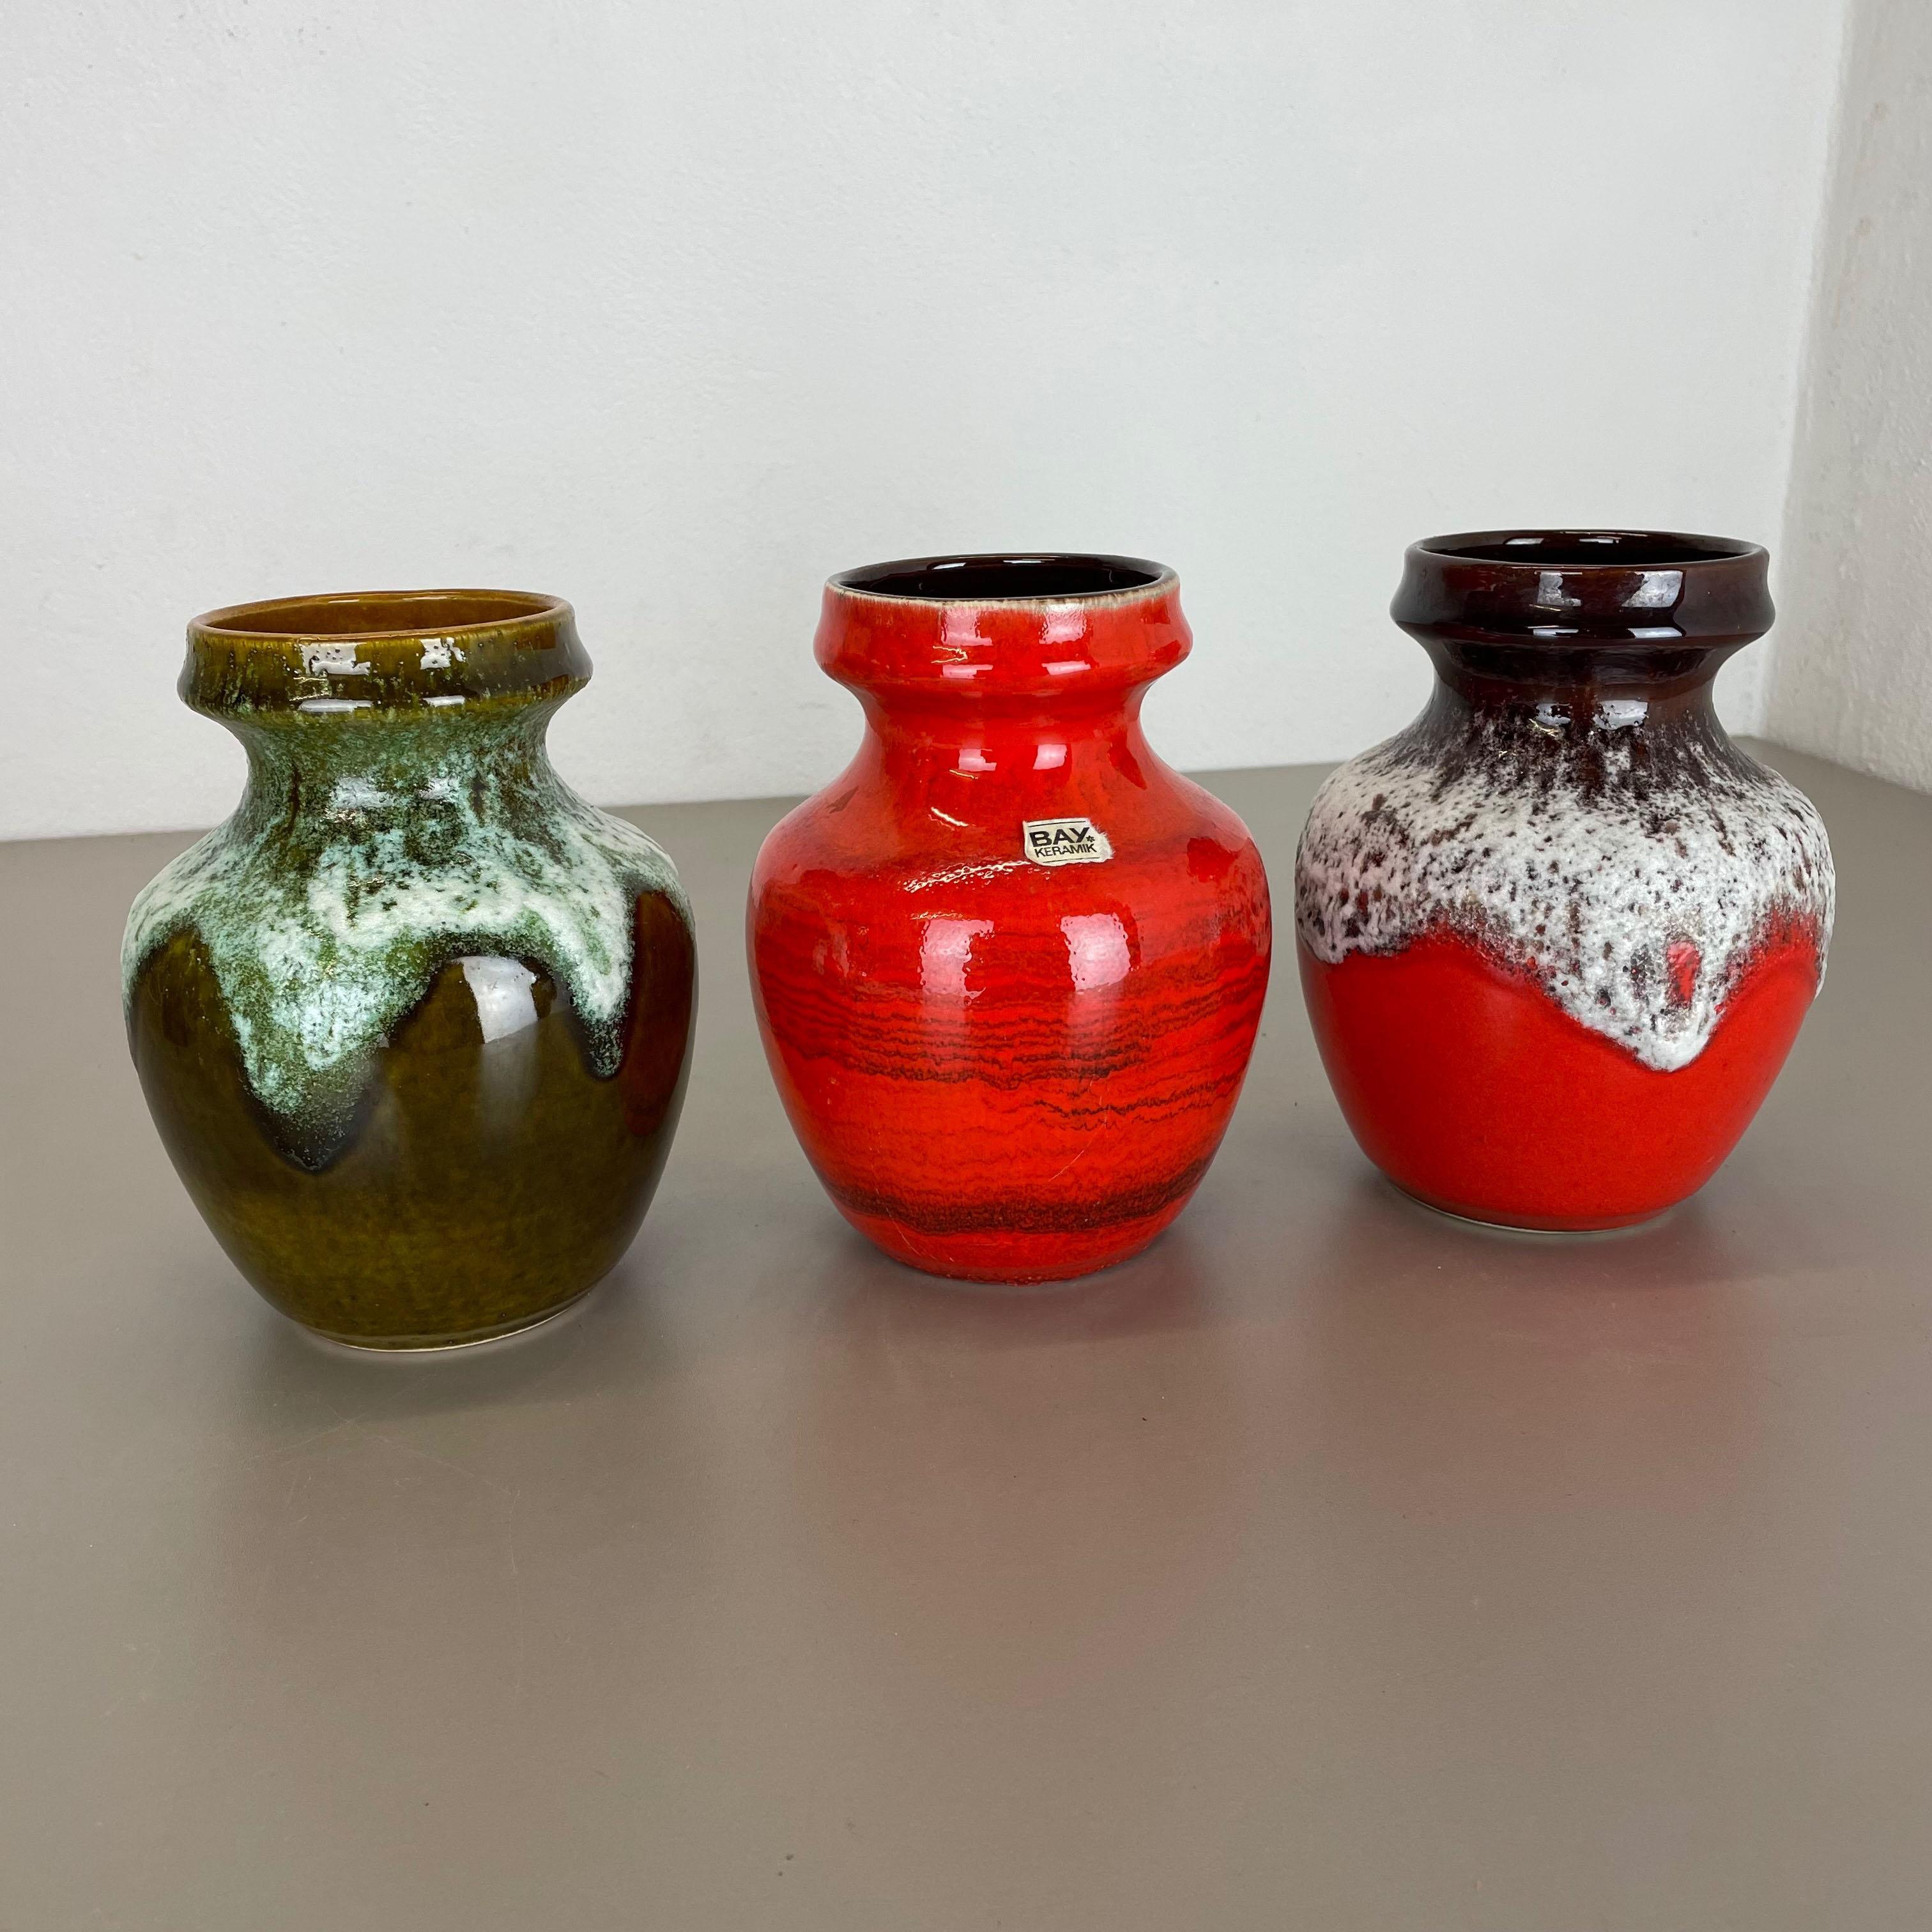 Article:

Pottery ceramic vase set of 3


Producer:

BAY Ceramic, Germany


Decade:

1970s



Description:

Set of 3 original vintage 1960s pottery ceramic vase made in Germany. High quality German production with a nice abstract